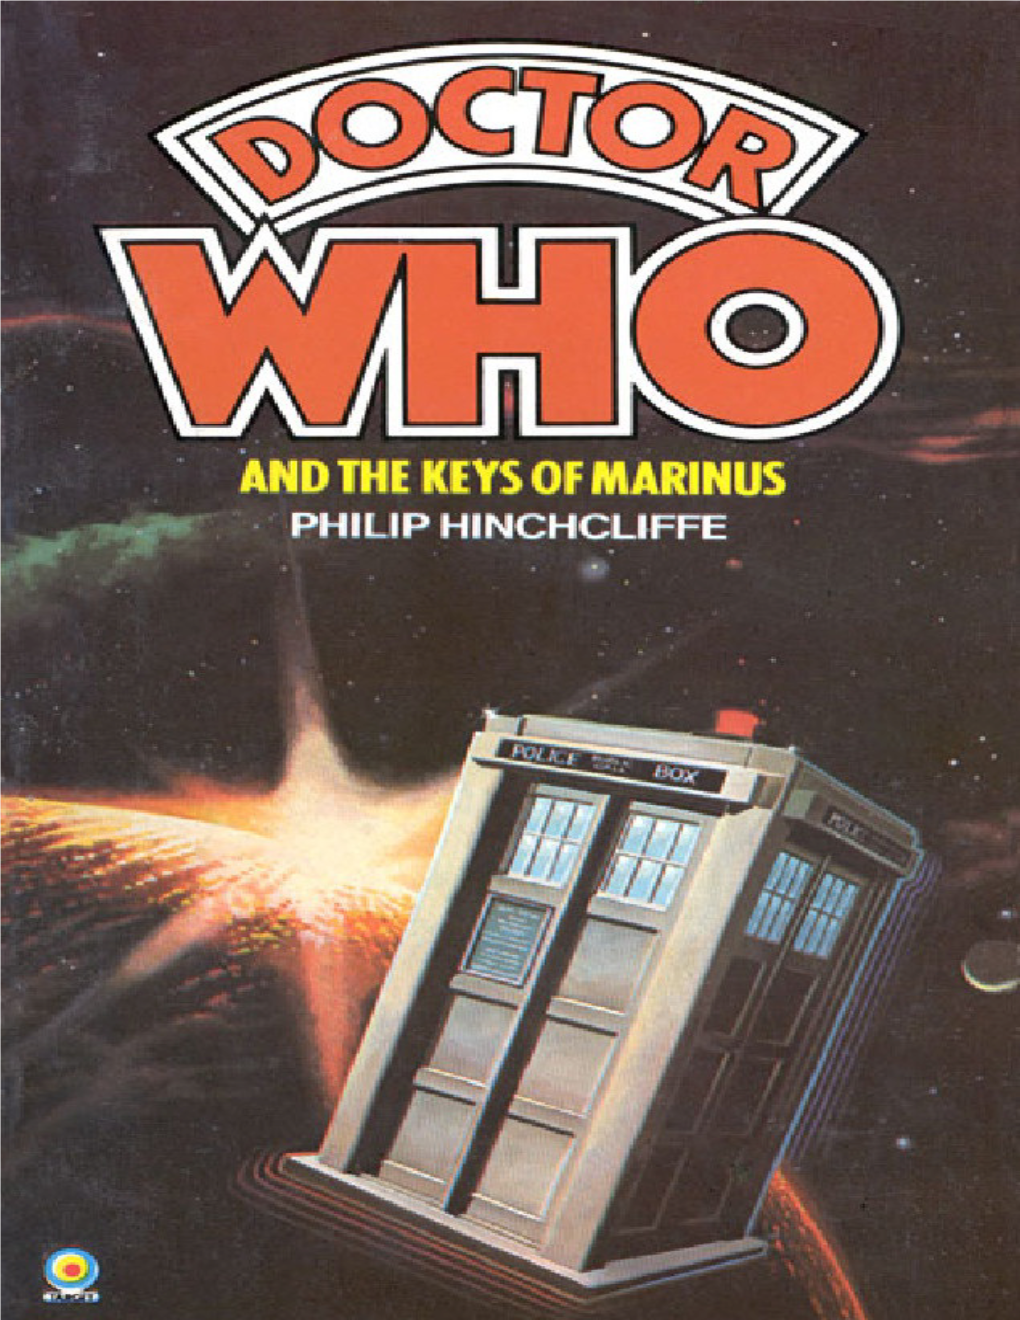 DOCTOR WHO and the KEYS of MARINUS by PHILIP HINCHCLIFFE